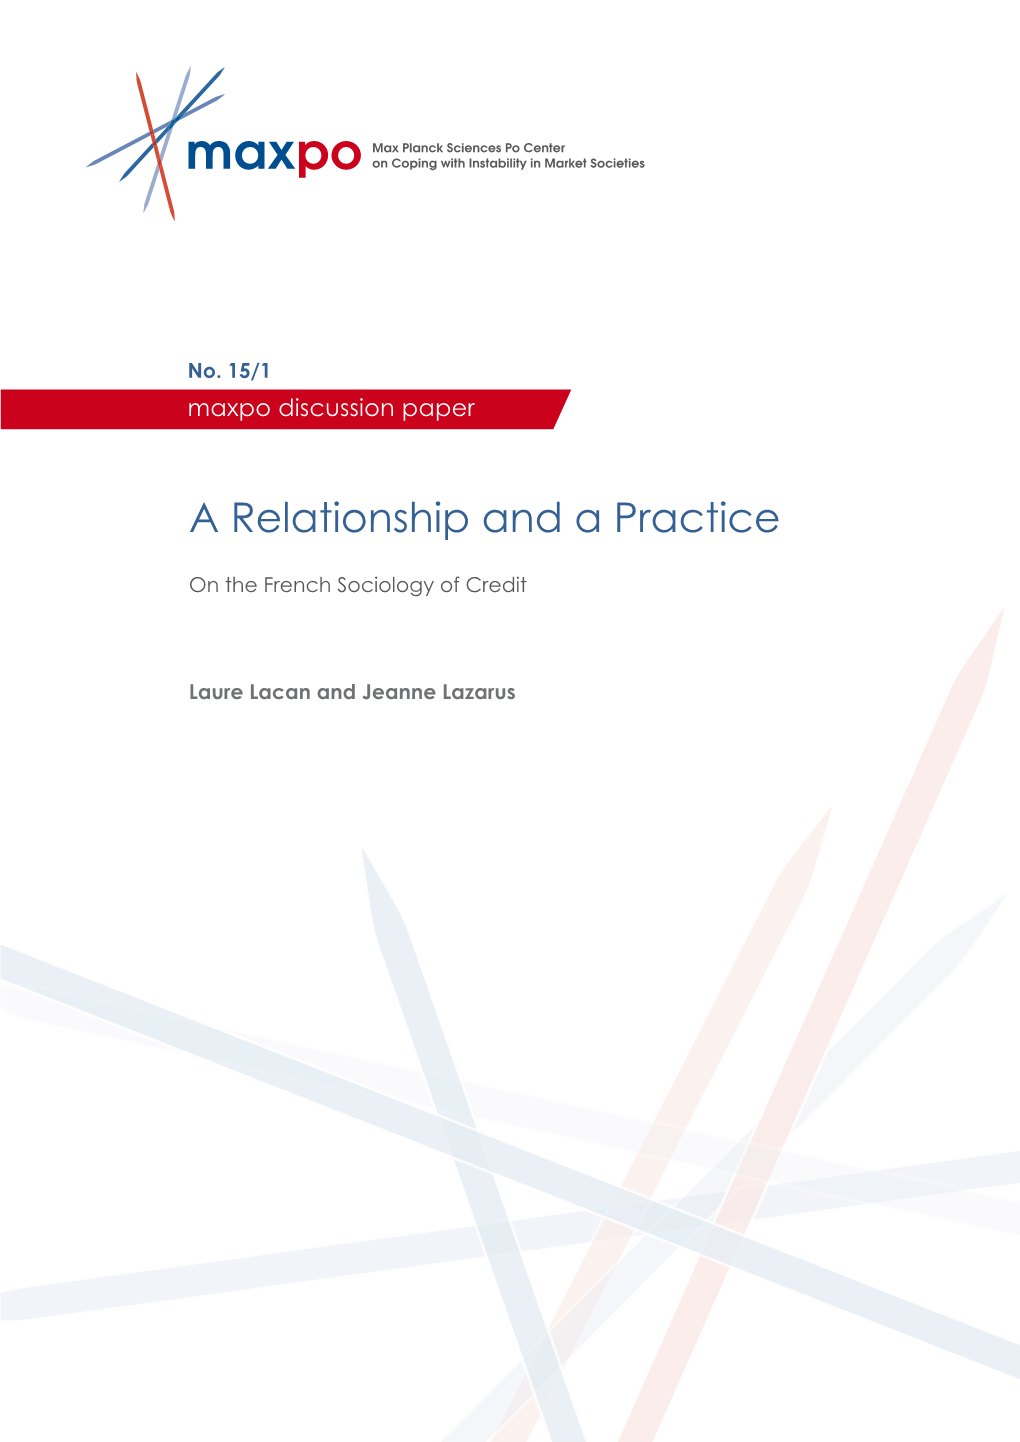 A Relationship and a Practice: on the French Sociology of Credit